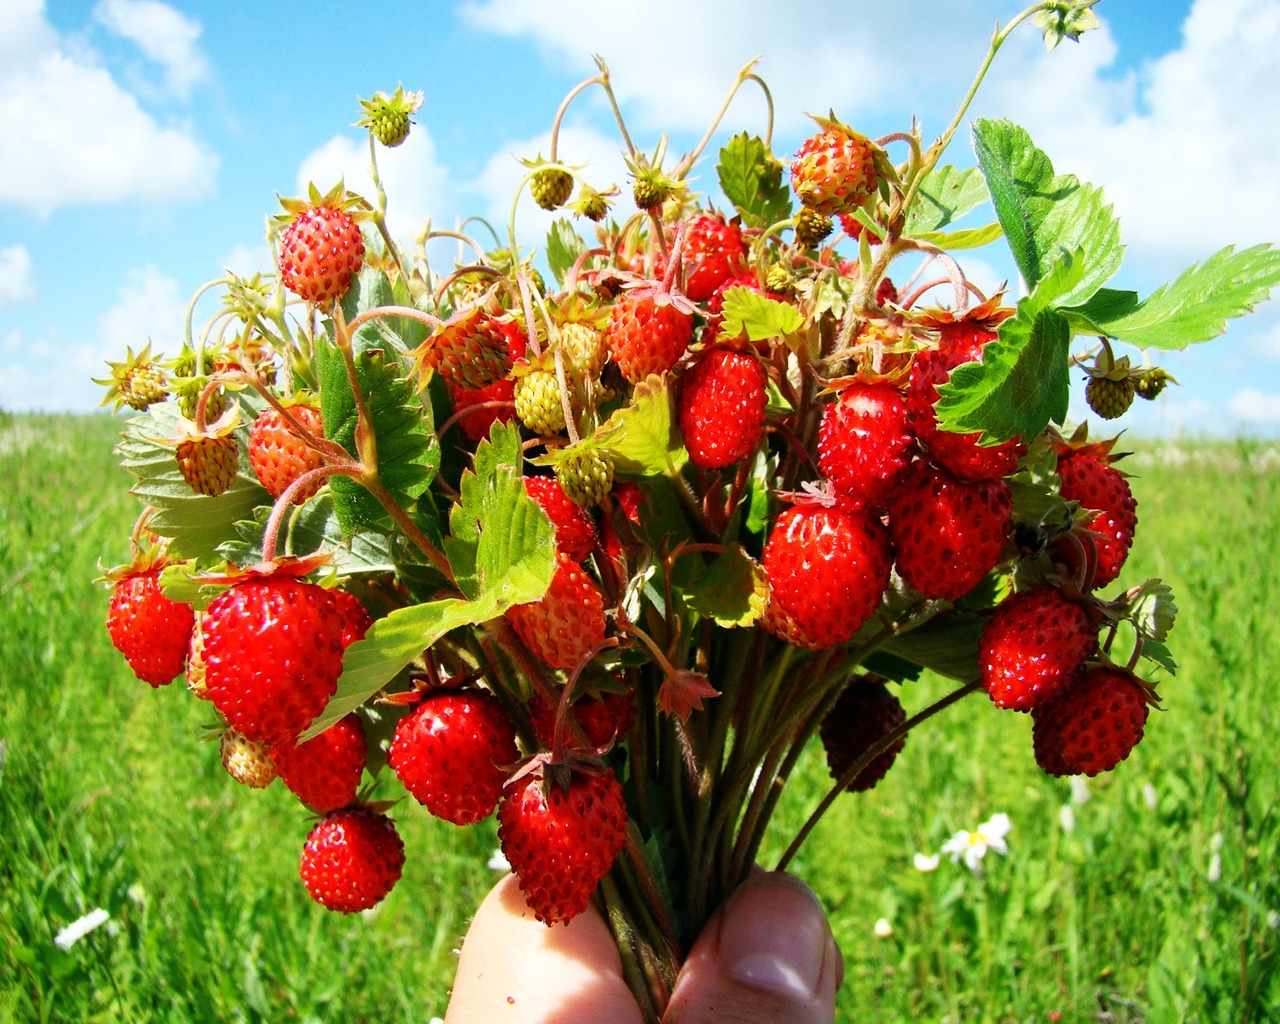 Bouquet of wild strawberries for 1280 x 1024 resolution